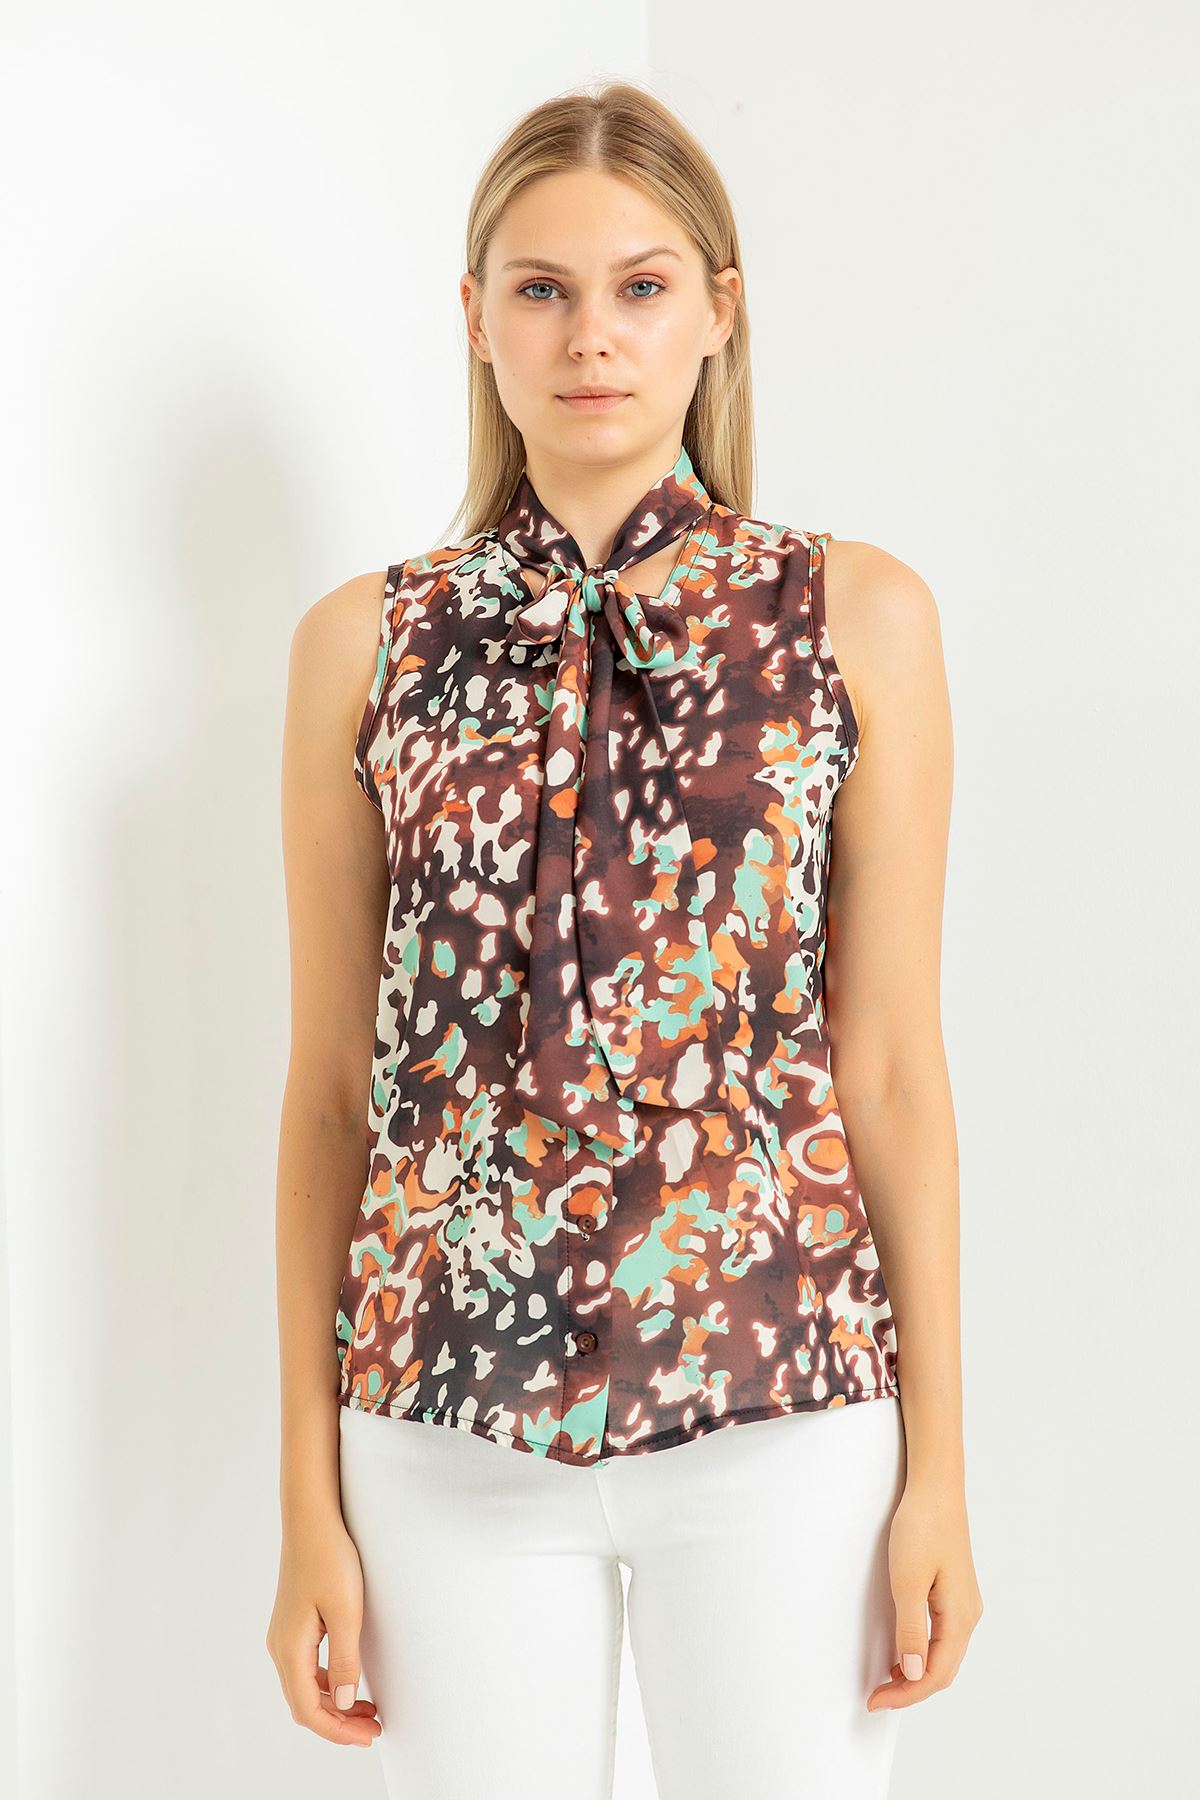 Jessica Fabric Sleeveless Full Patterned Scarf Collar Blouse - Mint